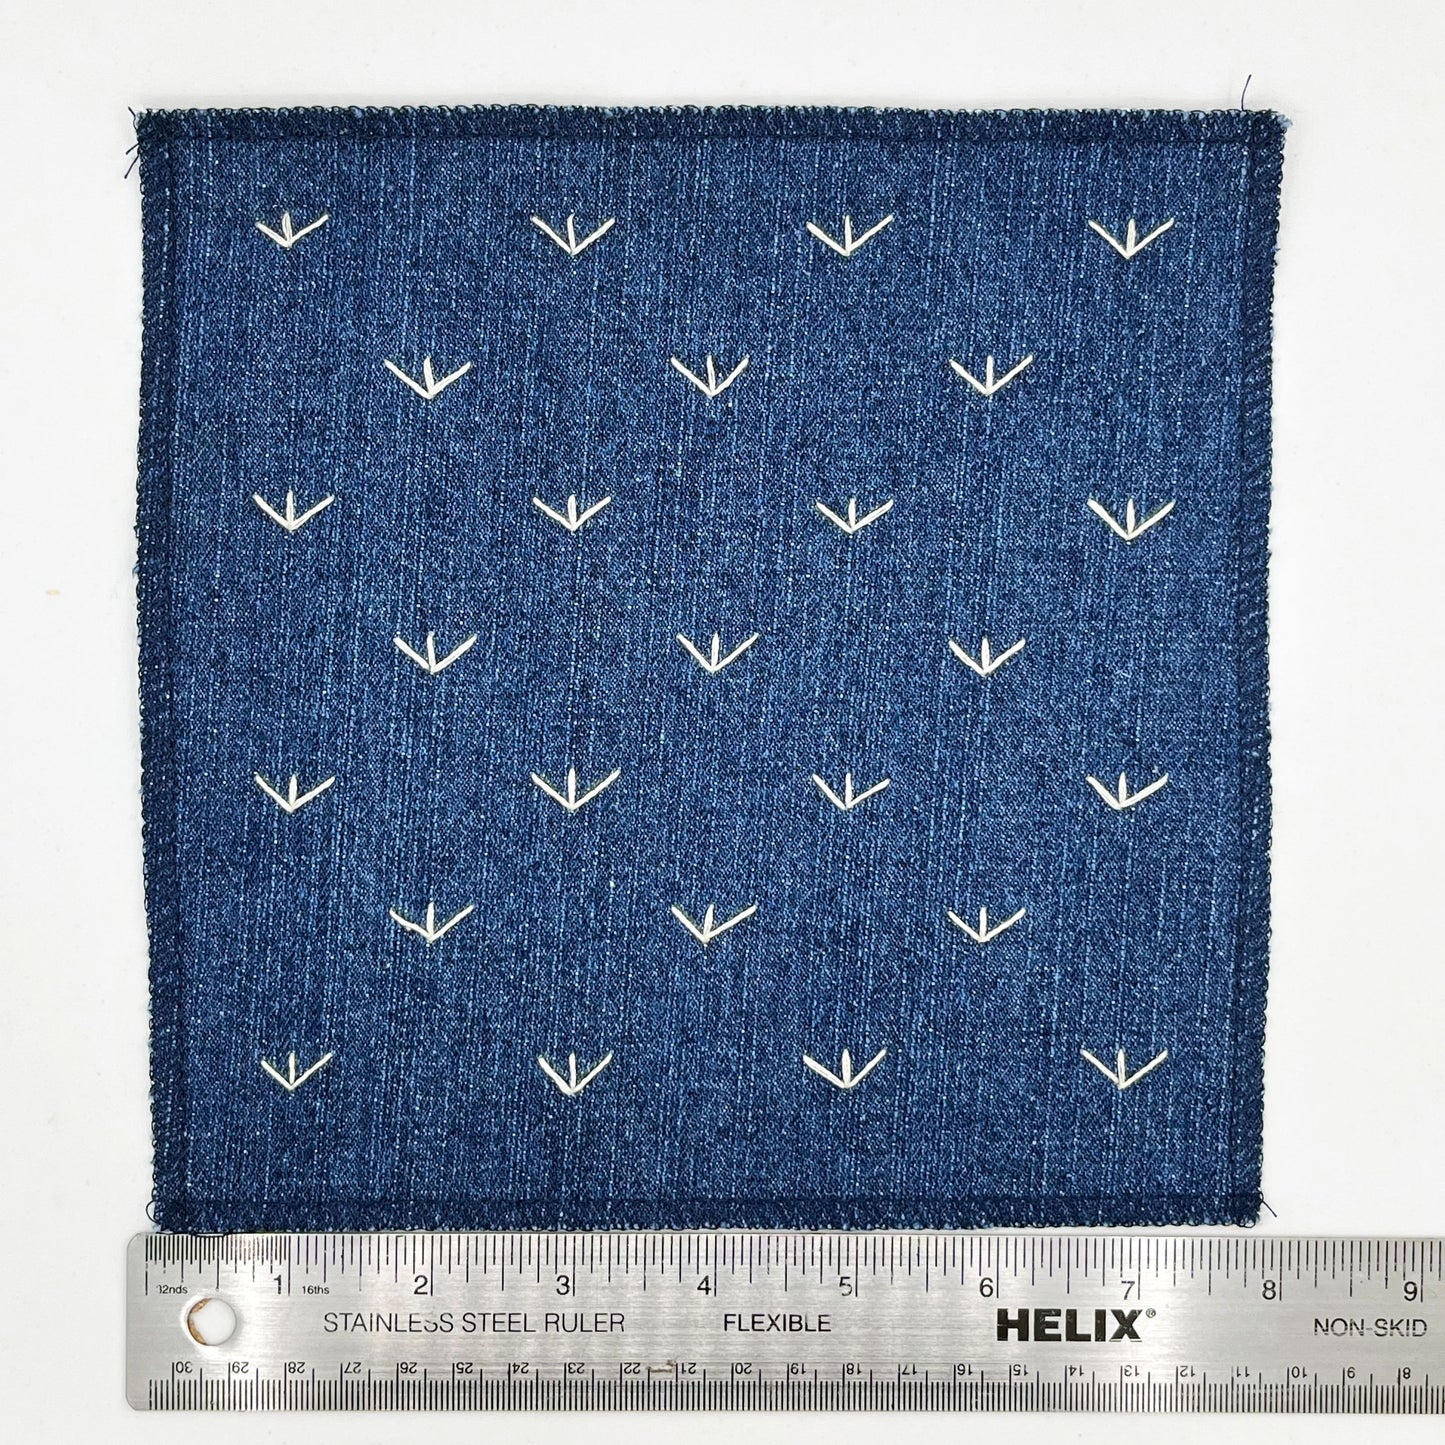 a square denim patch, with ivory stitches that look like birds feet or sprouts spread out in a diamond pattern, with overlocked edges, placed next to a metal ruler to show a width of eight inches